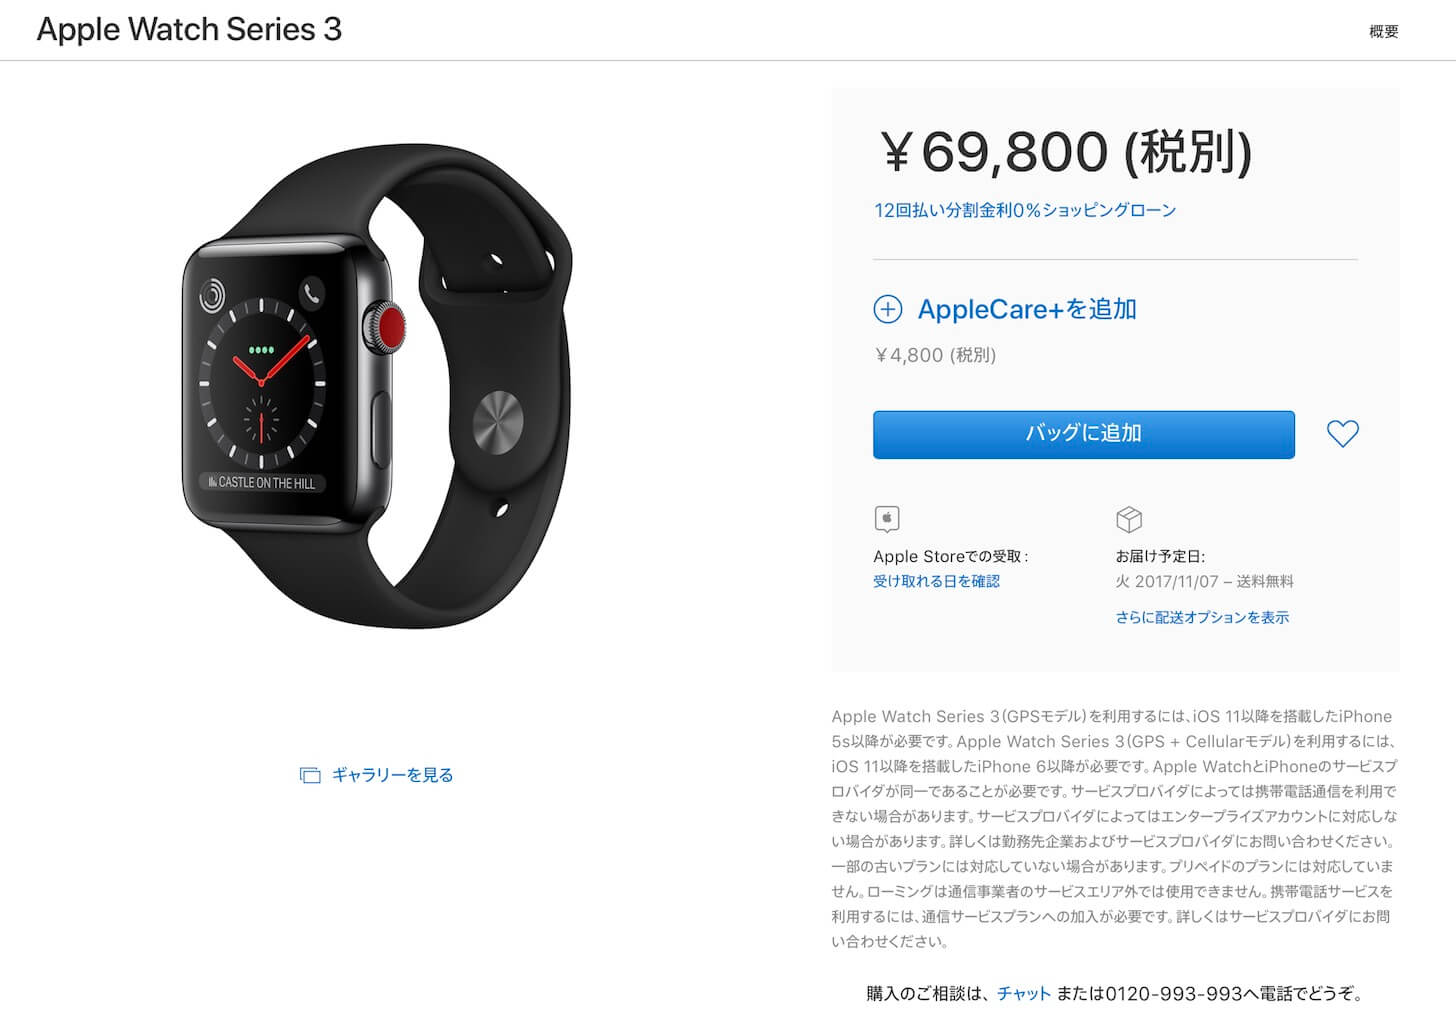 Have an interest in Apple Watch Series 3 6